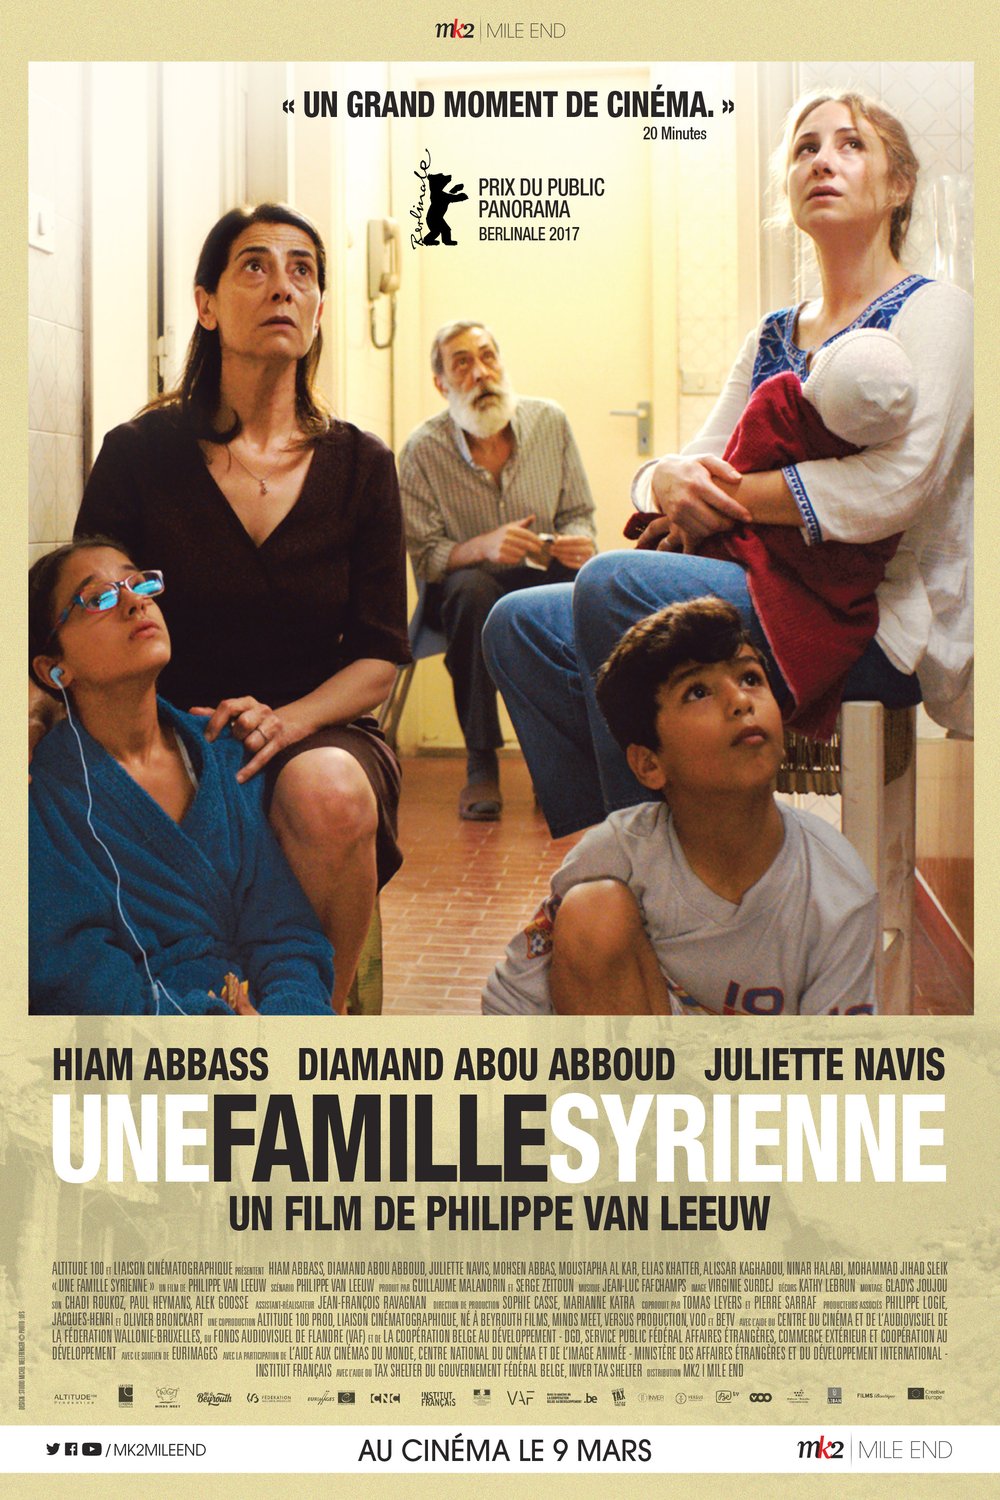 Poster of the movie Une Famille syrienne